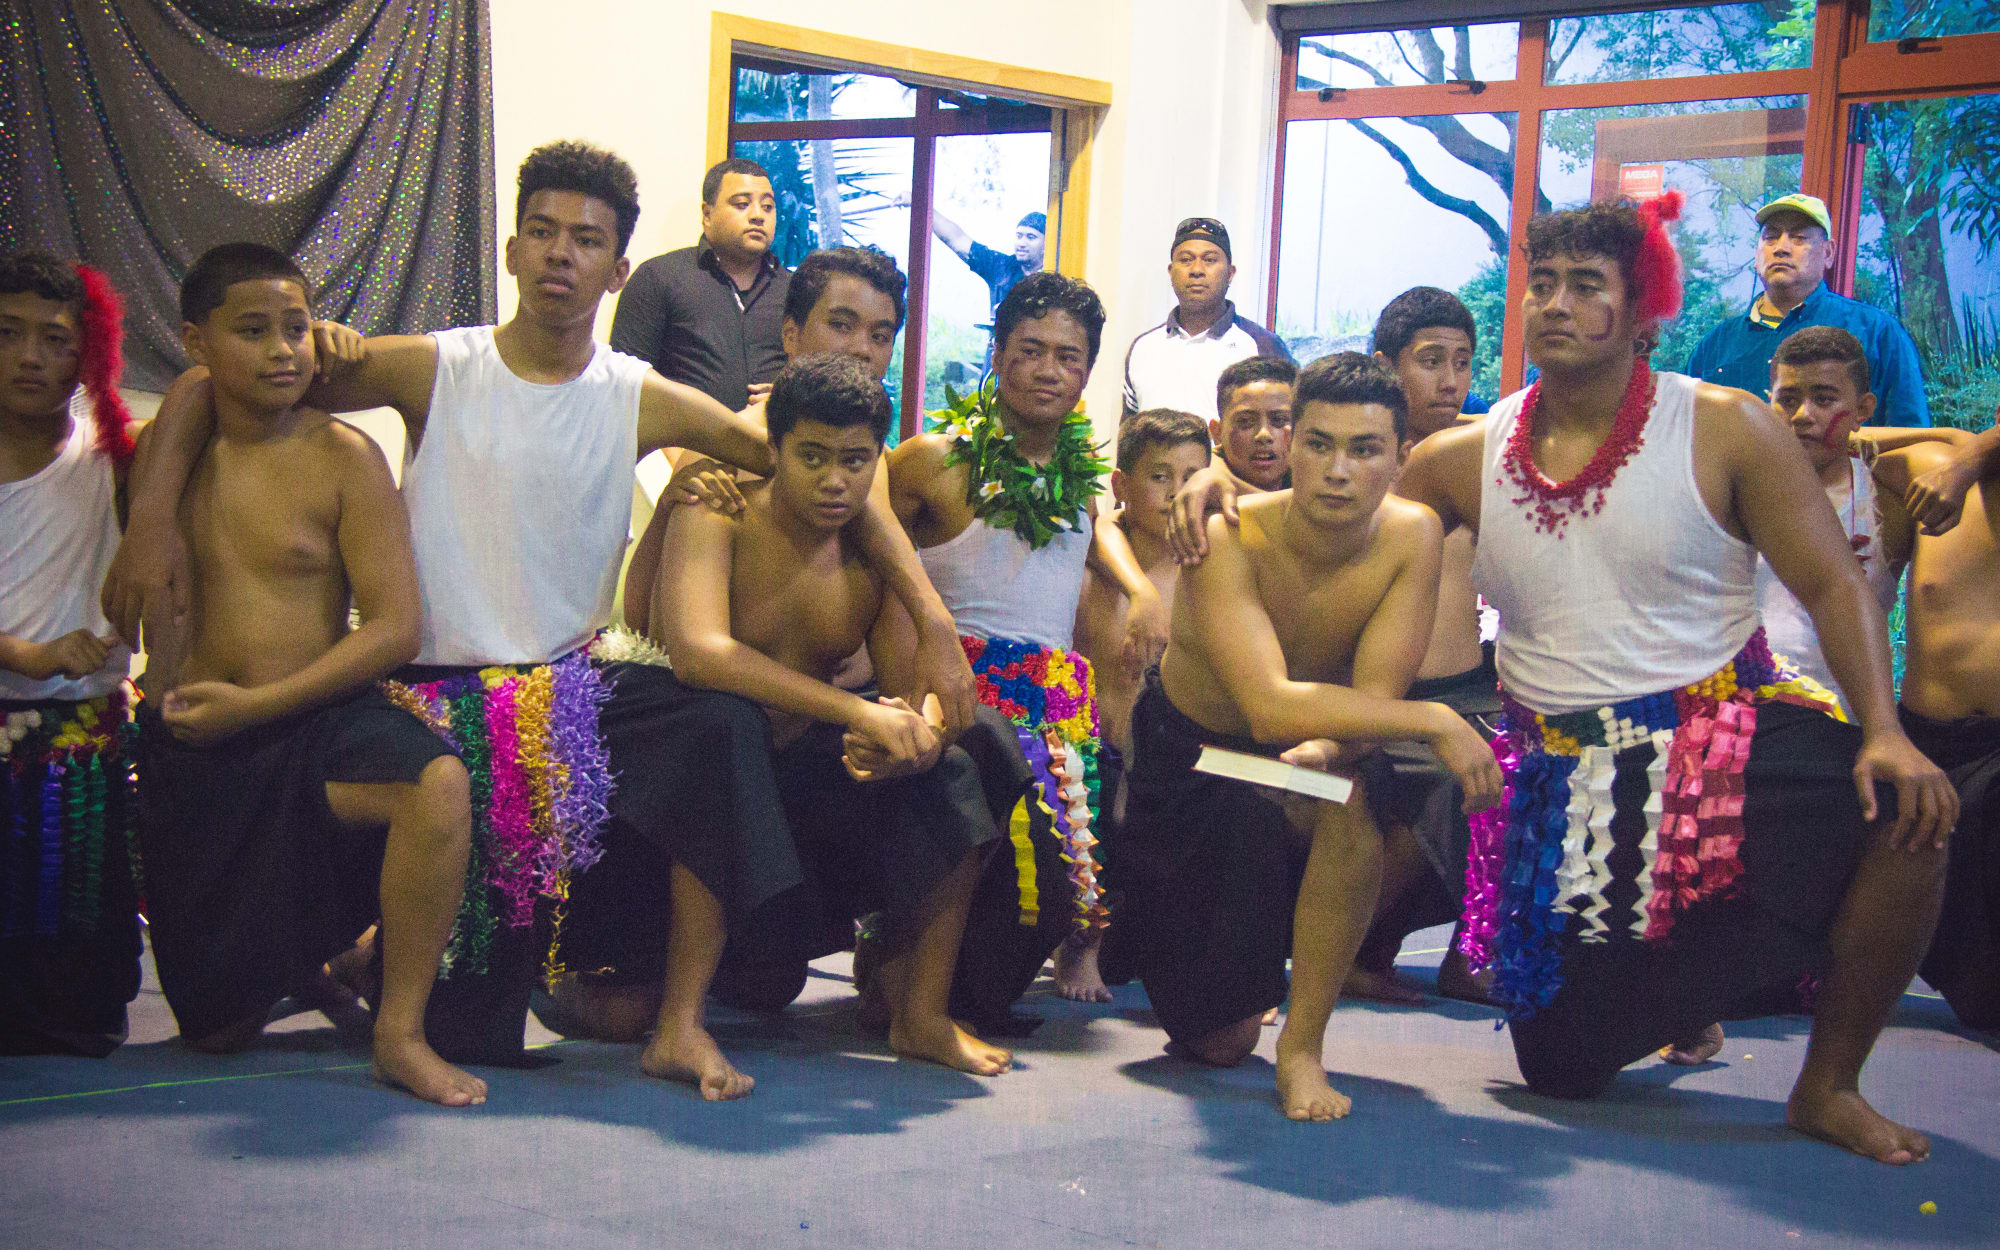 The St Paul's Samoan and Tongan groups gather together after performing at Fiafia night.